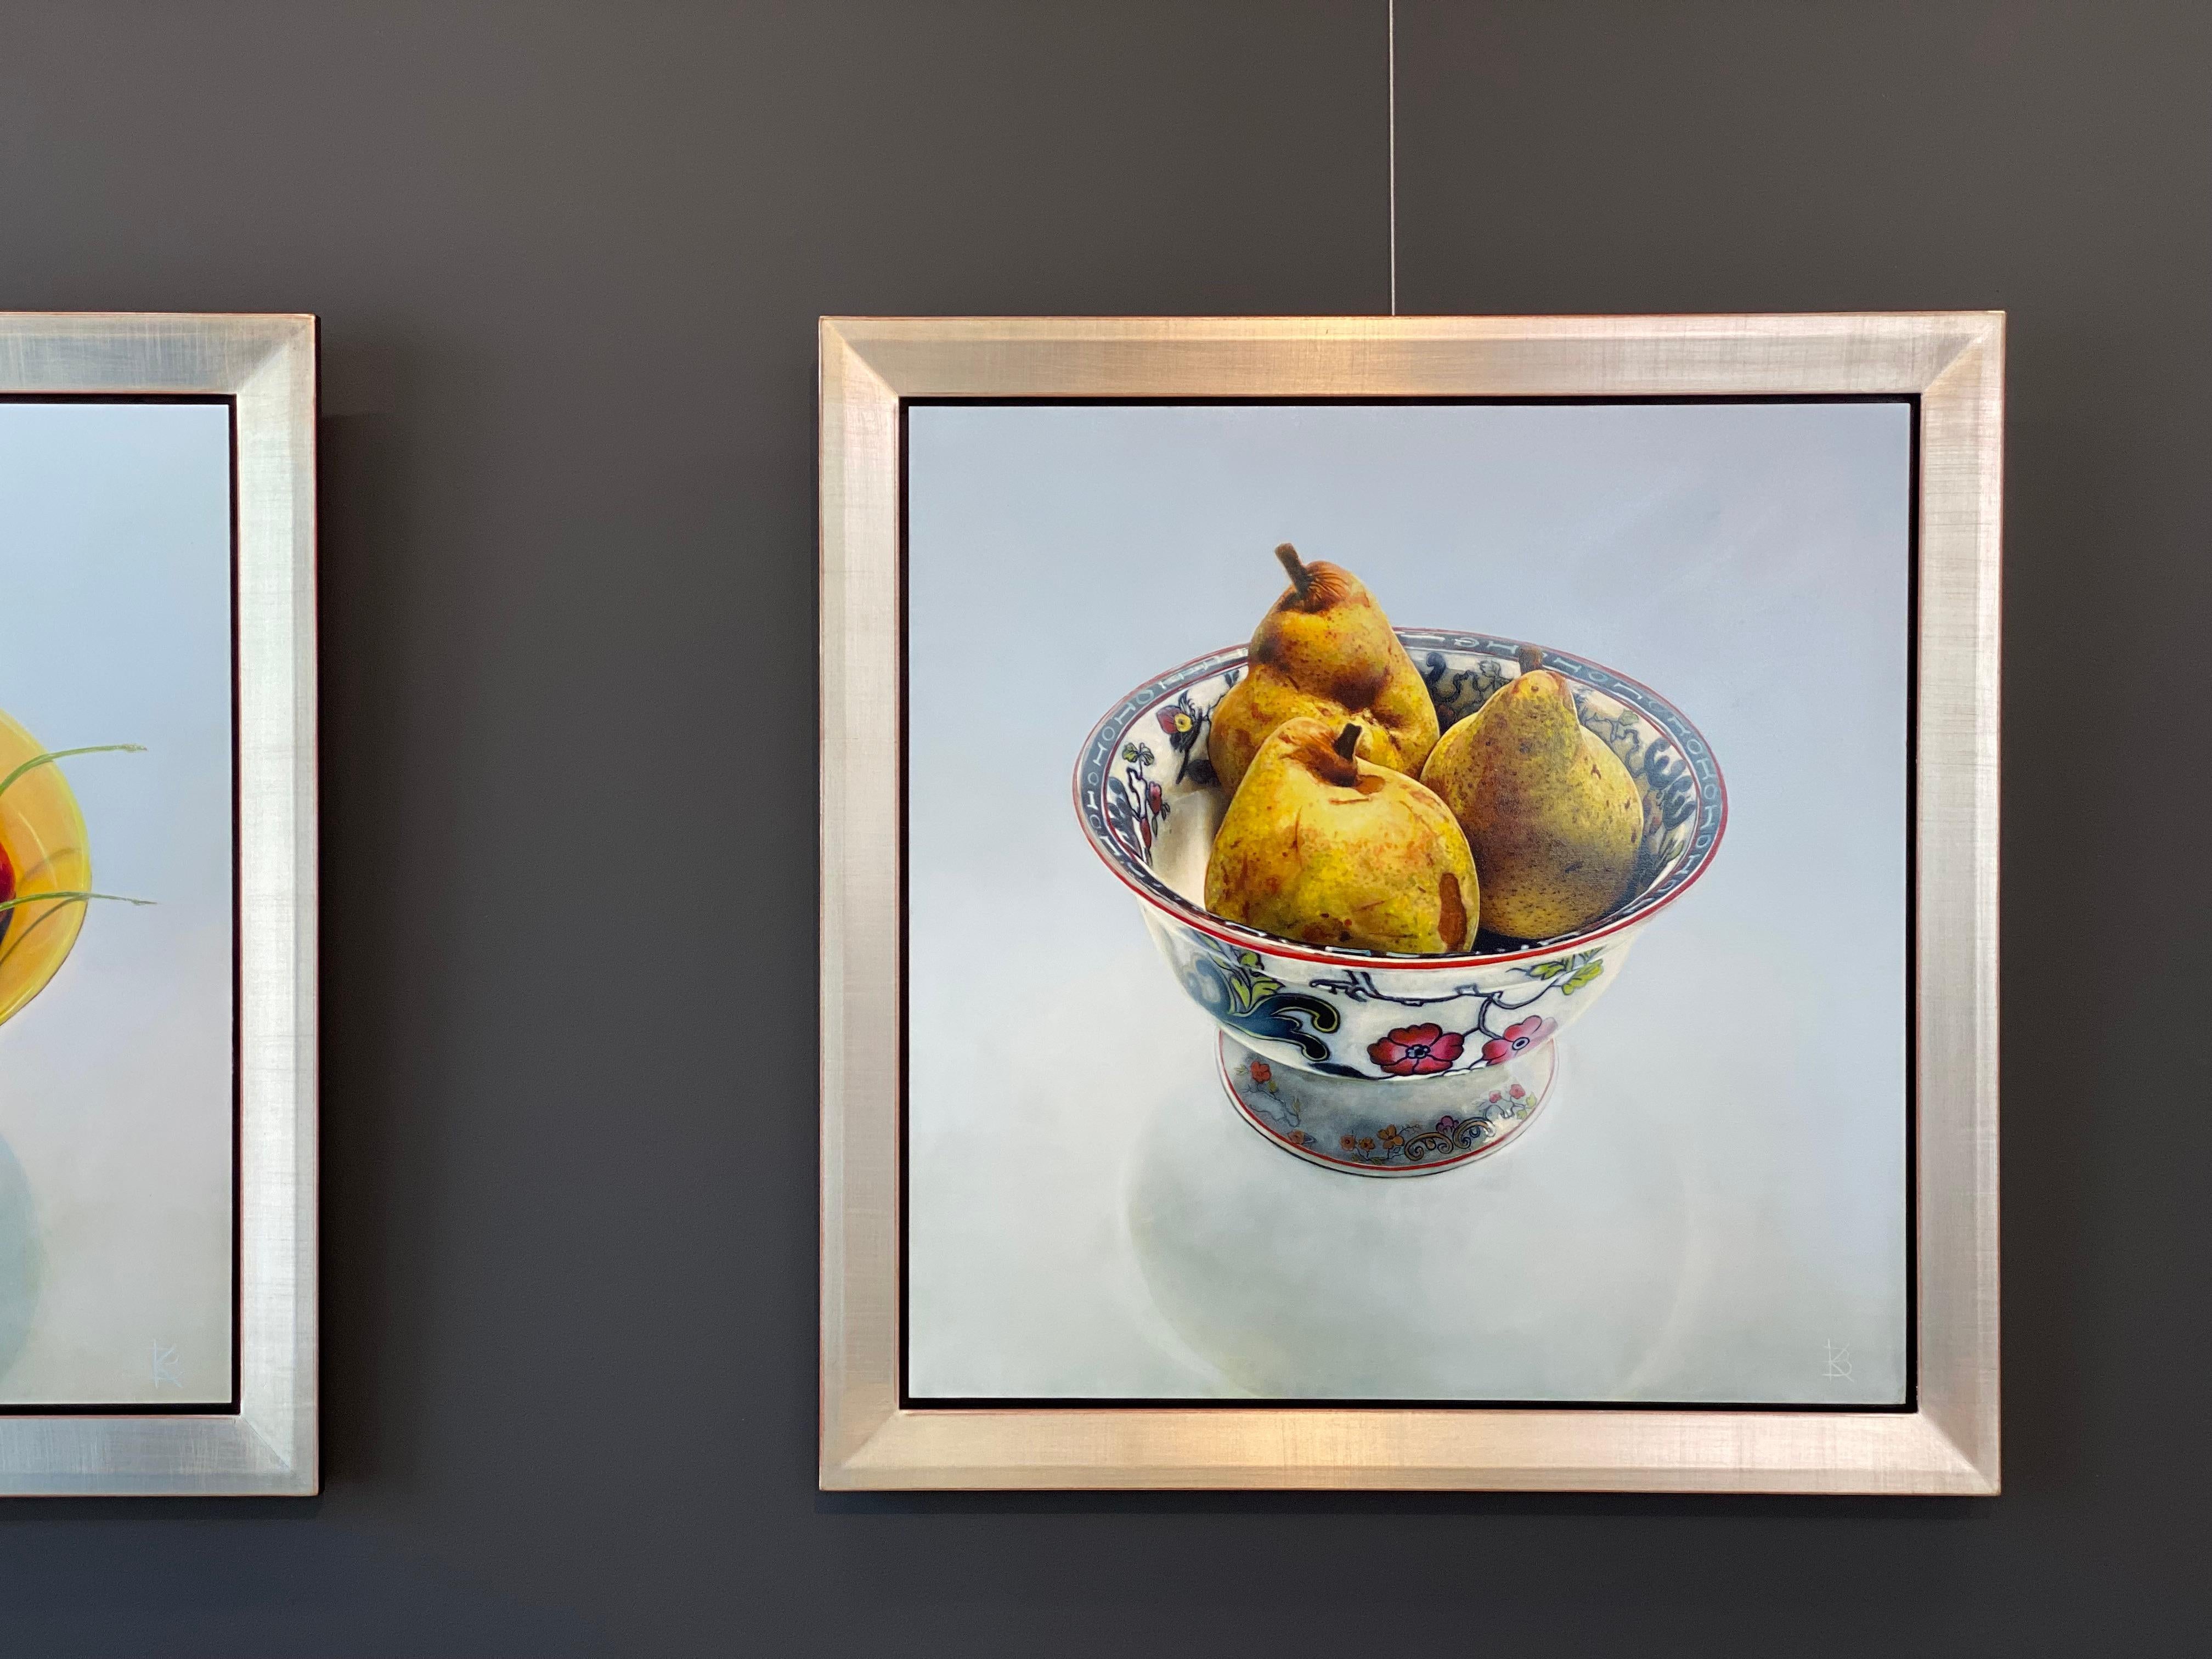 Old Dutch Pears
90 x 90  cm  2022
Oil on panel 
The painting is framed in an handmade white gold gilded frame  105 x 105 cm 

This Hyper realistic painting is made by Kees Blom.  (2022)

The artist finds his inspiration in the still life of the